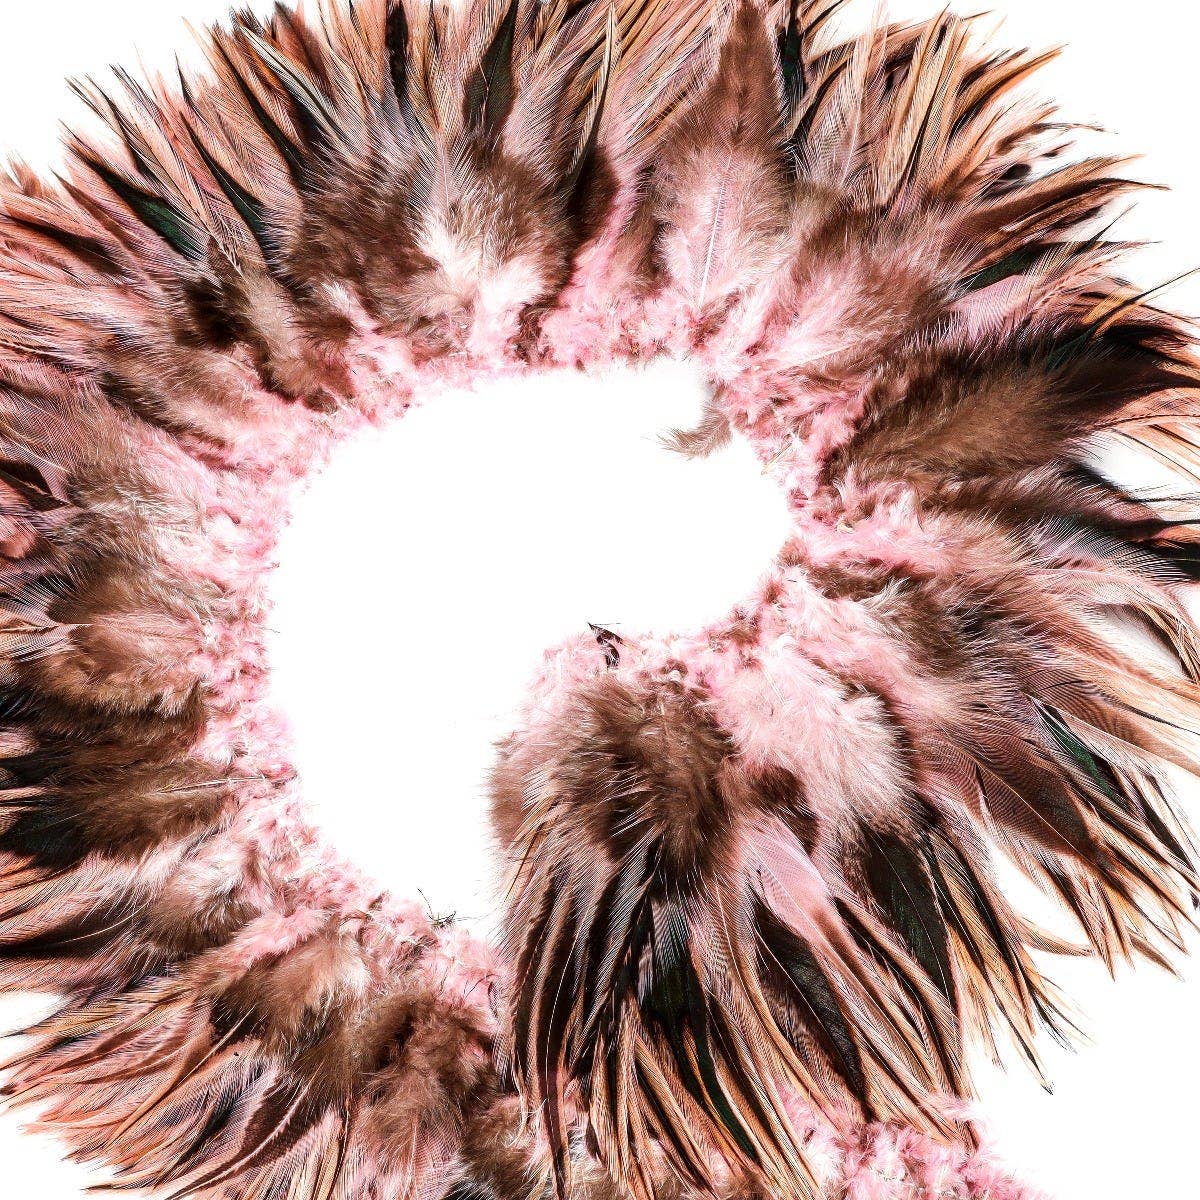 Badger Rooster Saddle Feathers Strung - 1/2 Yard (18" strip) 4-6" Rooster Feathers - Candy Pink